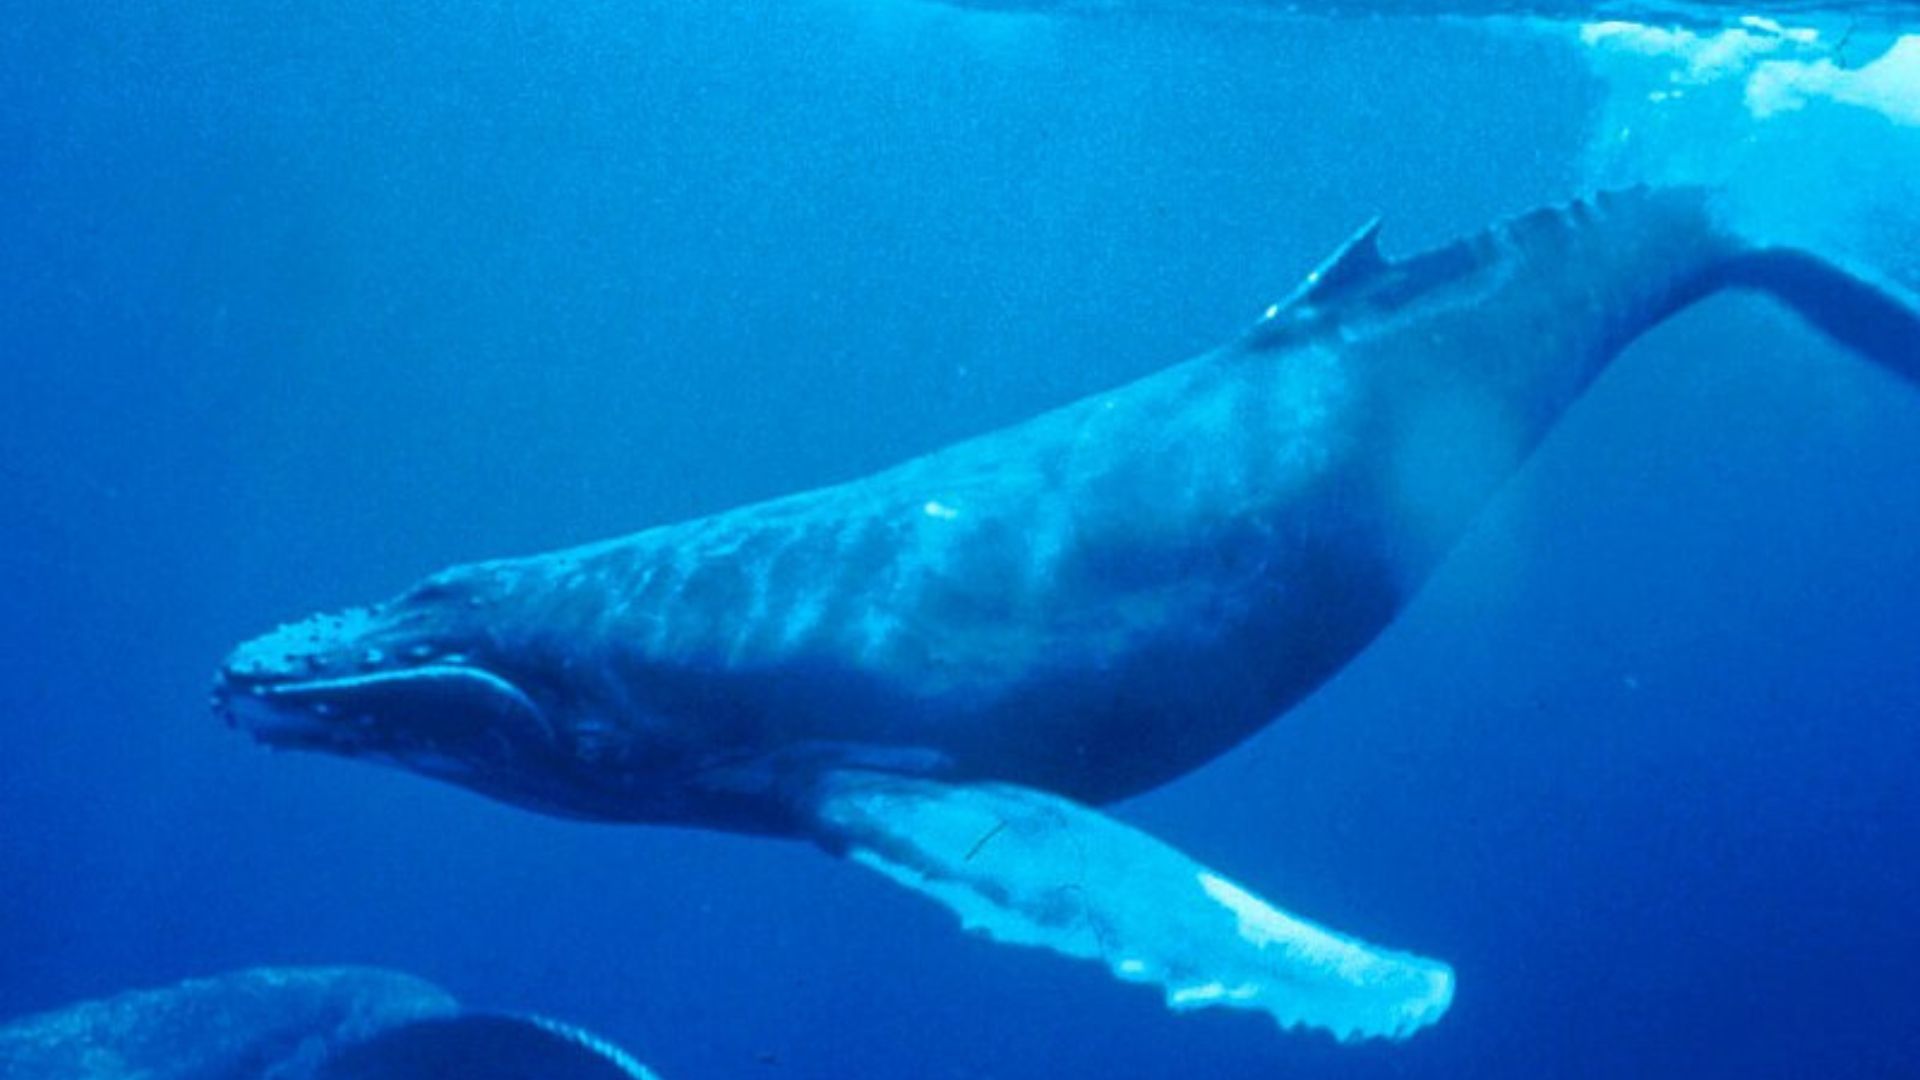 New Zealand Maori Leader Proposes Legal Personhood for Whales: Reports